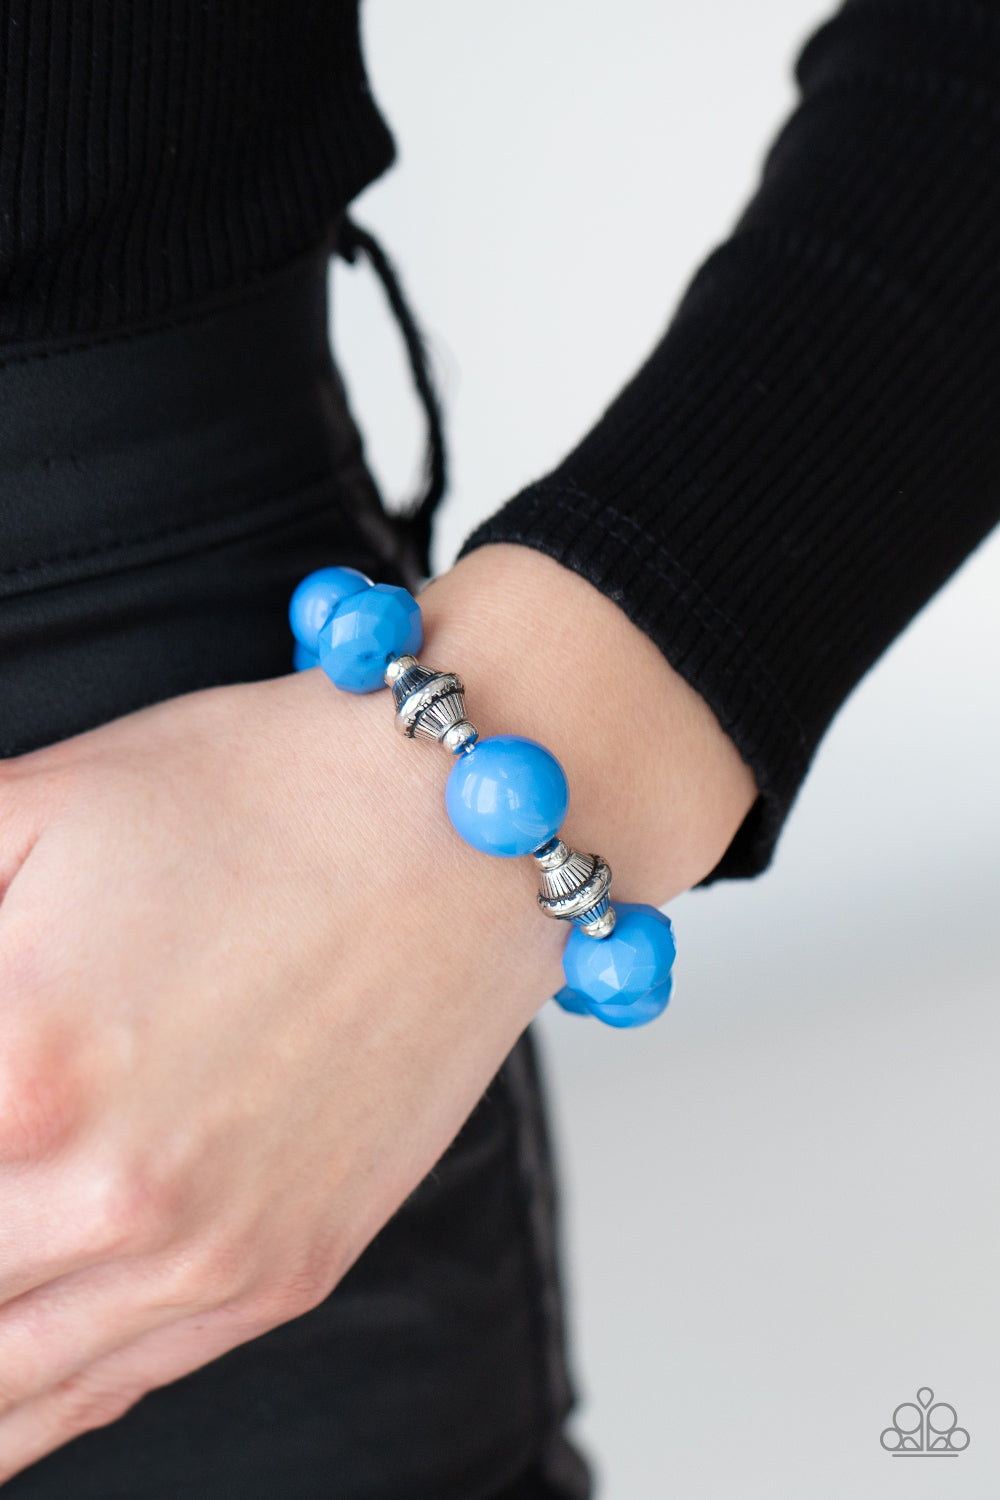 Day Trip Discovery Blue Bracelet - Paparazzi Accessories  A collection of polished French Blue beads in smooth round and faceted shapes, are threaded along a stretchy band. Accents of silver beads etched in linear designs adds a down to earth finish to the whimsical bracelet.  All Paparazzi Accessories are lead free and nickel free!  Sold as one individual bracelet.